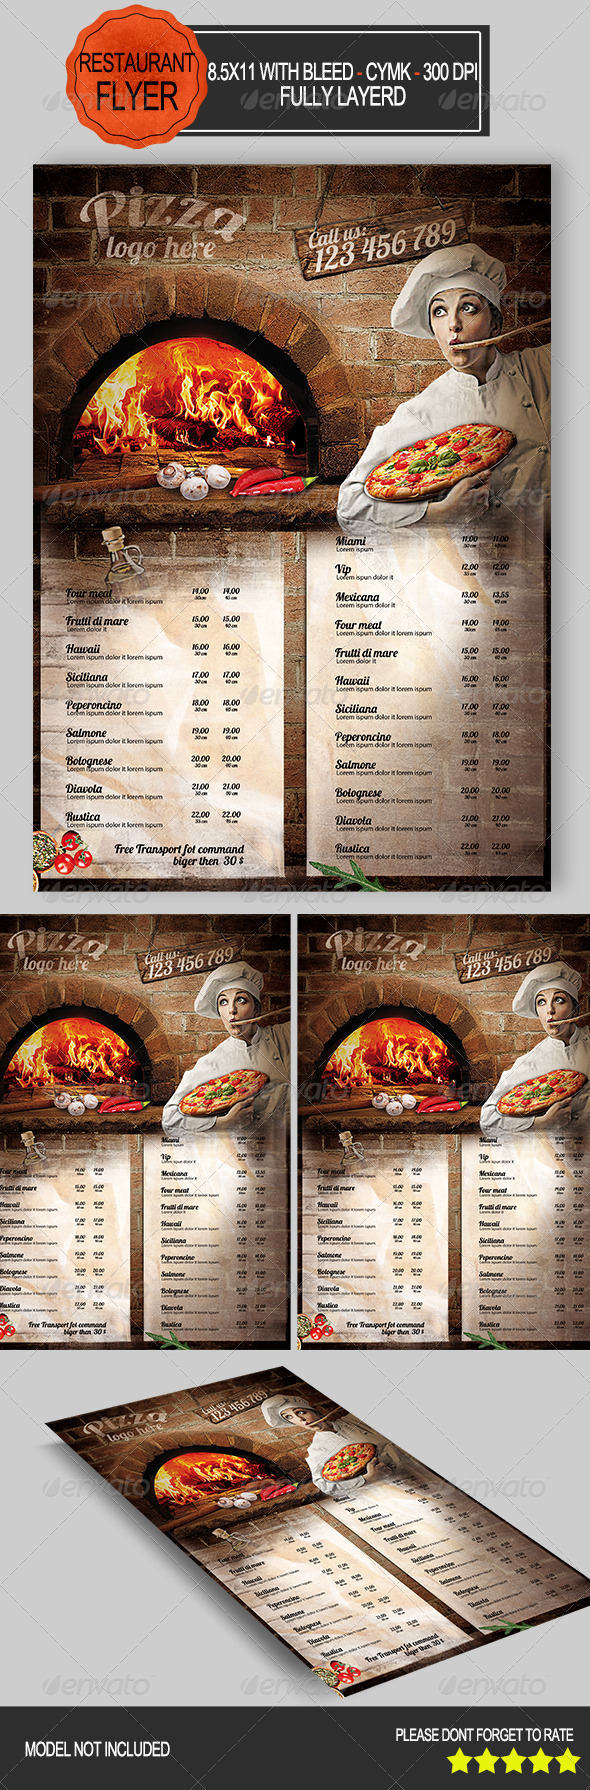 Flyer Psd Restaurant Flyer Templates From Graphicriver